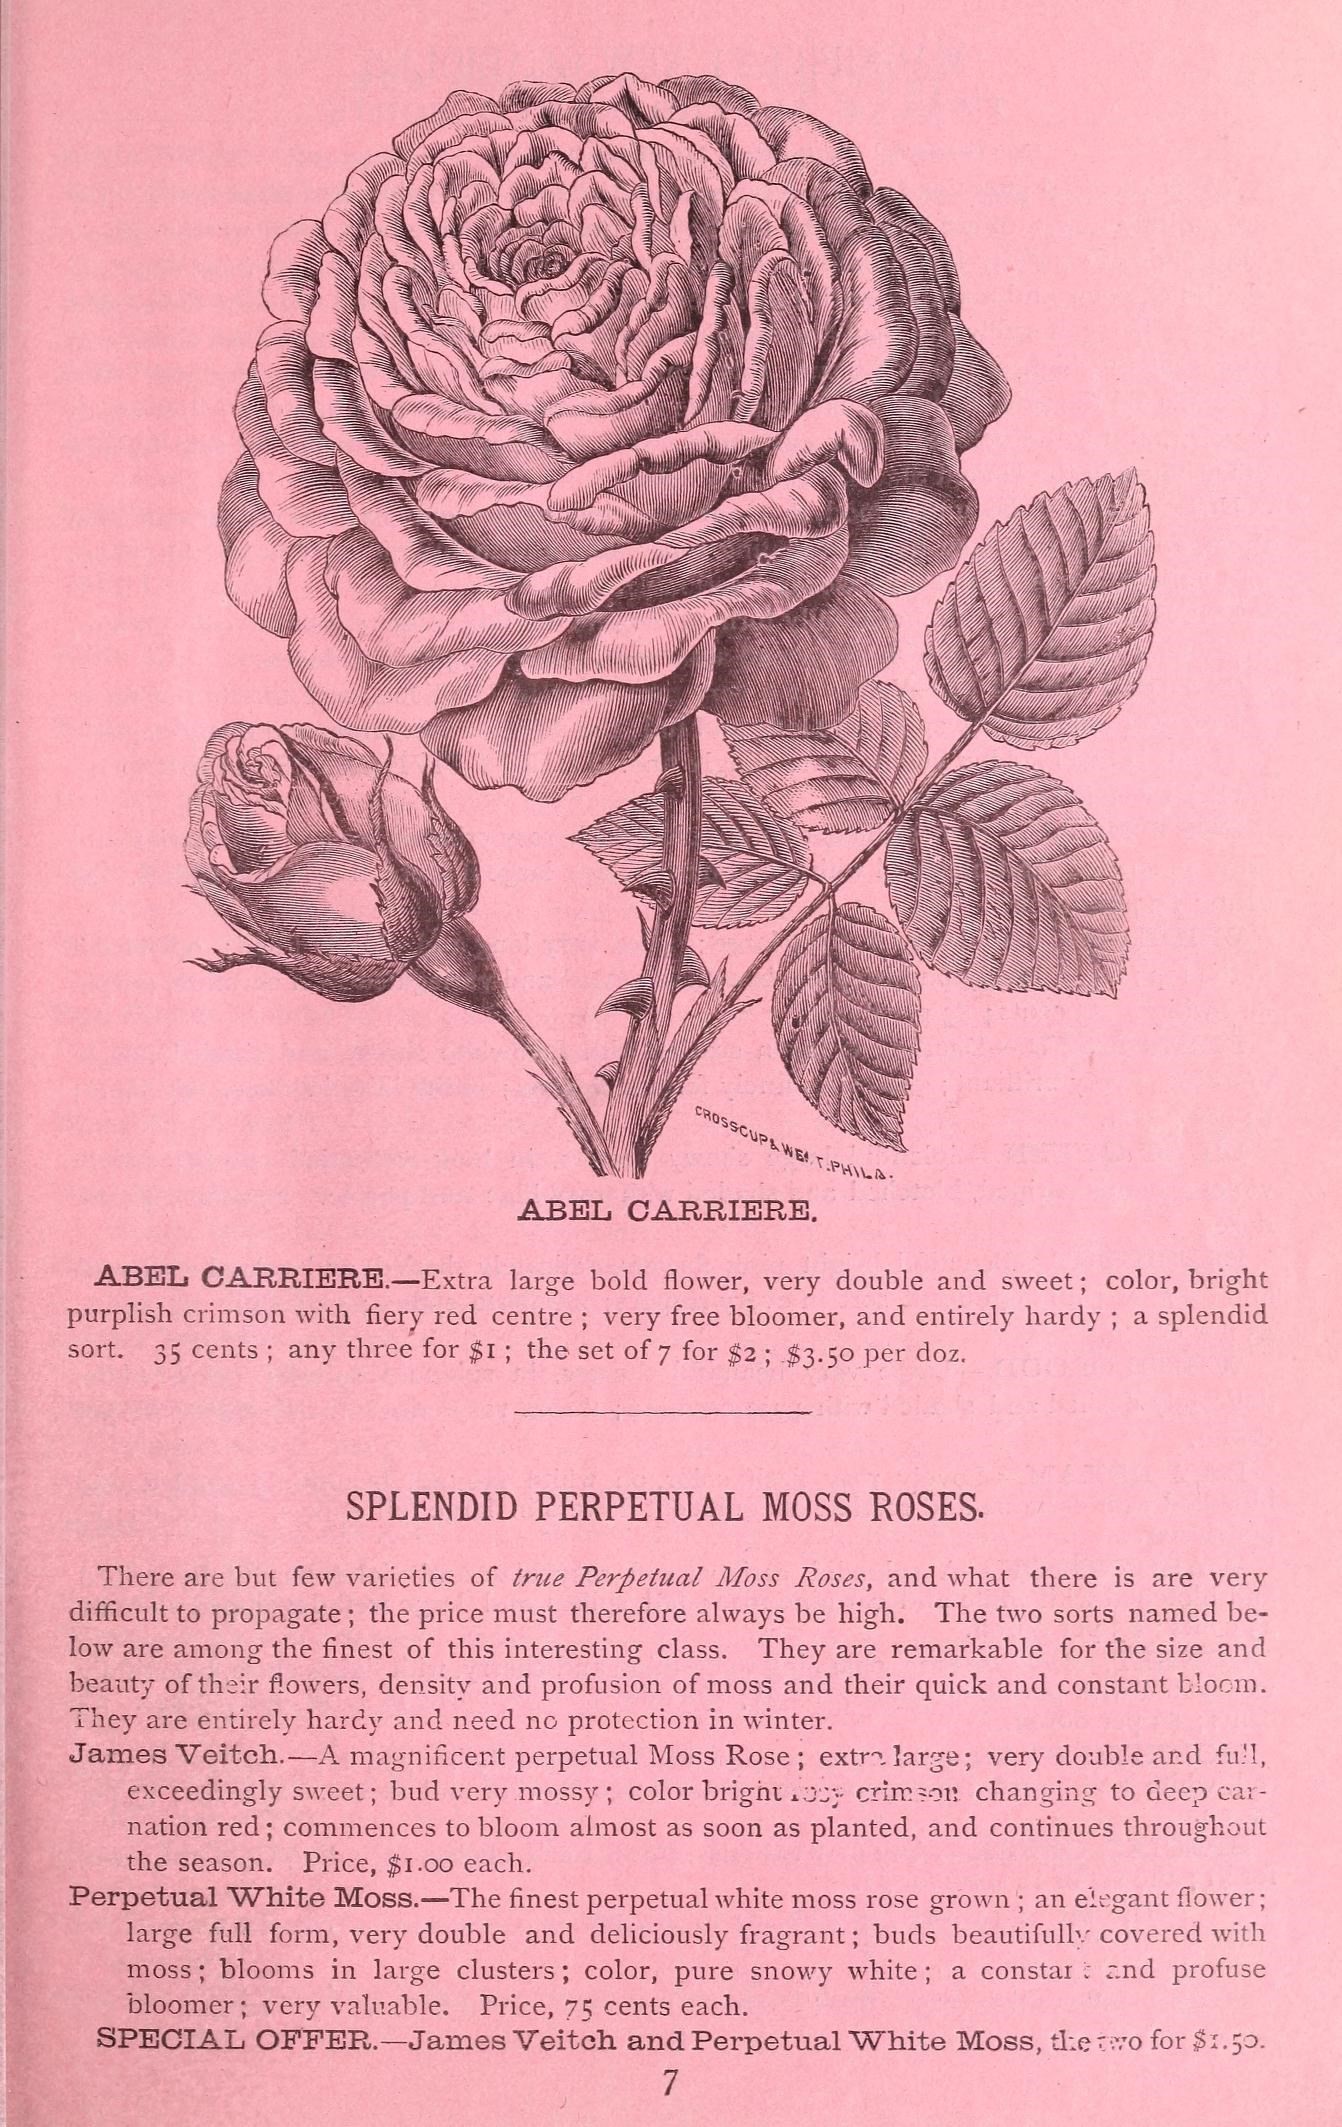 pink and white book titled the endymped flower moss roses